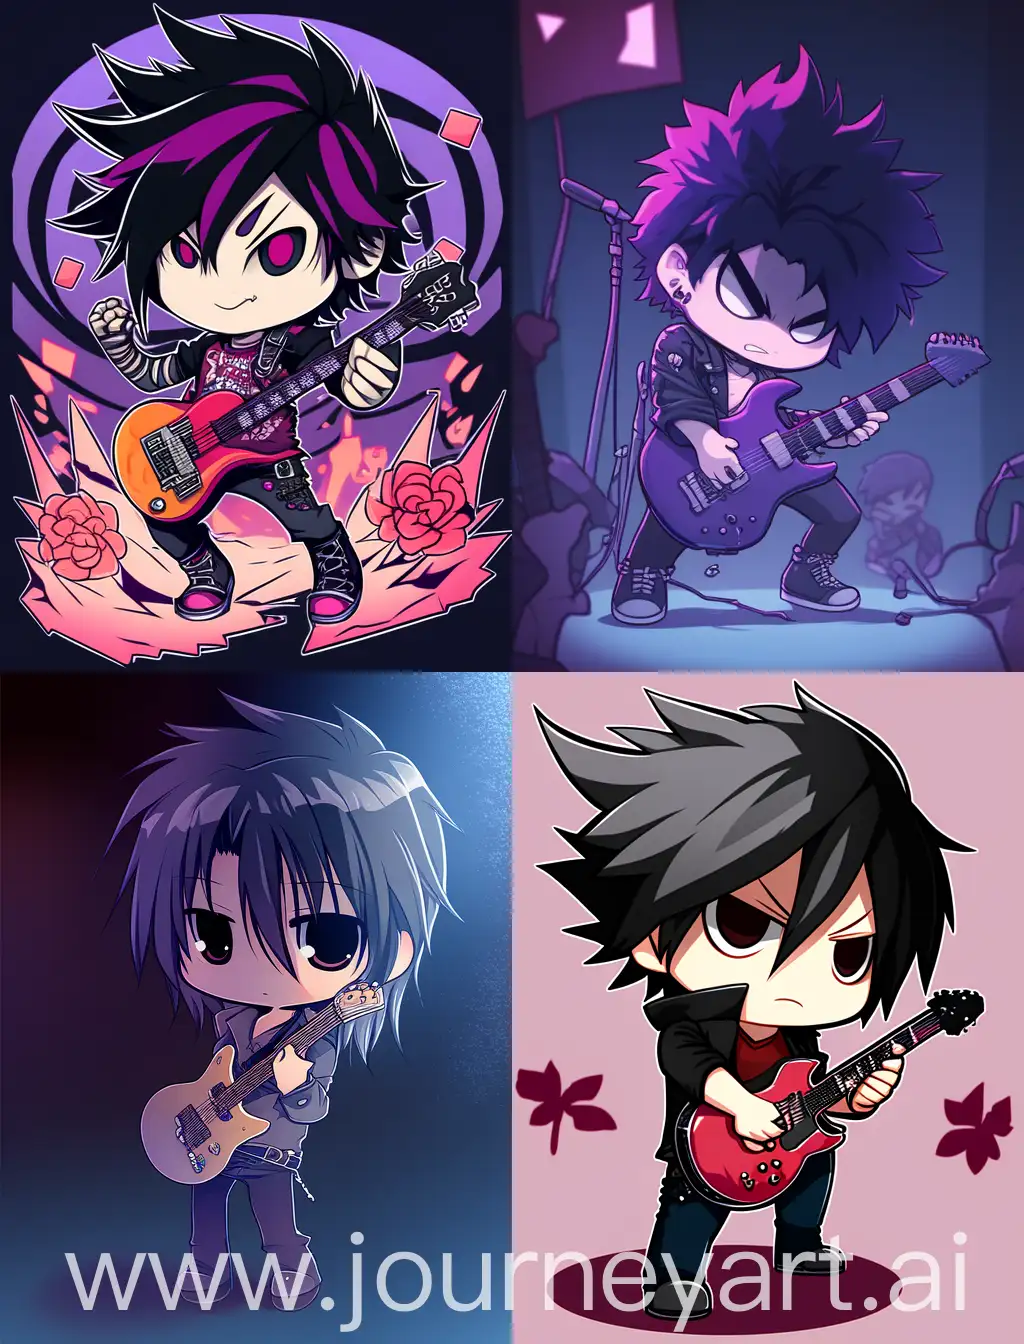 Chibi-Emo-Guy-Playing-Guitar-in-Spooky-Anime-Cartoon-Style